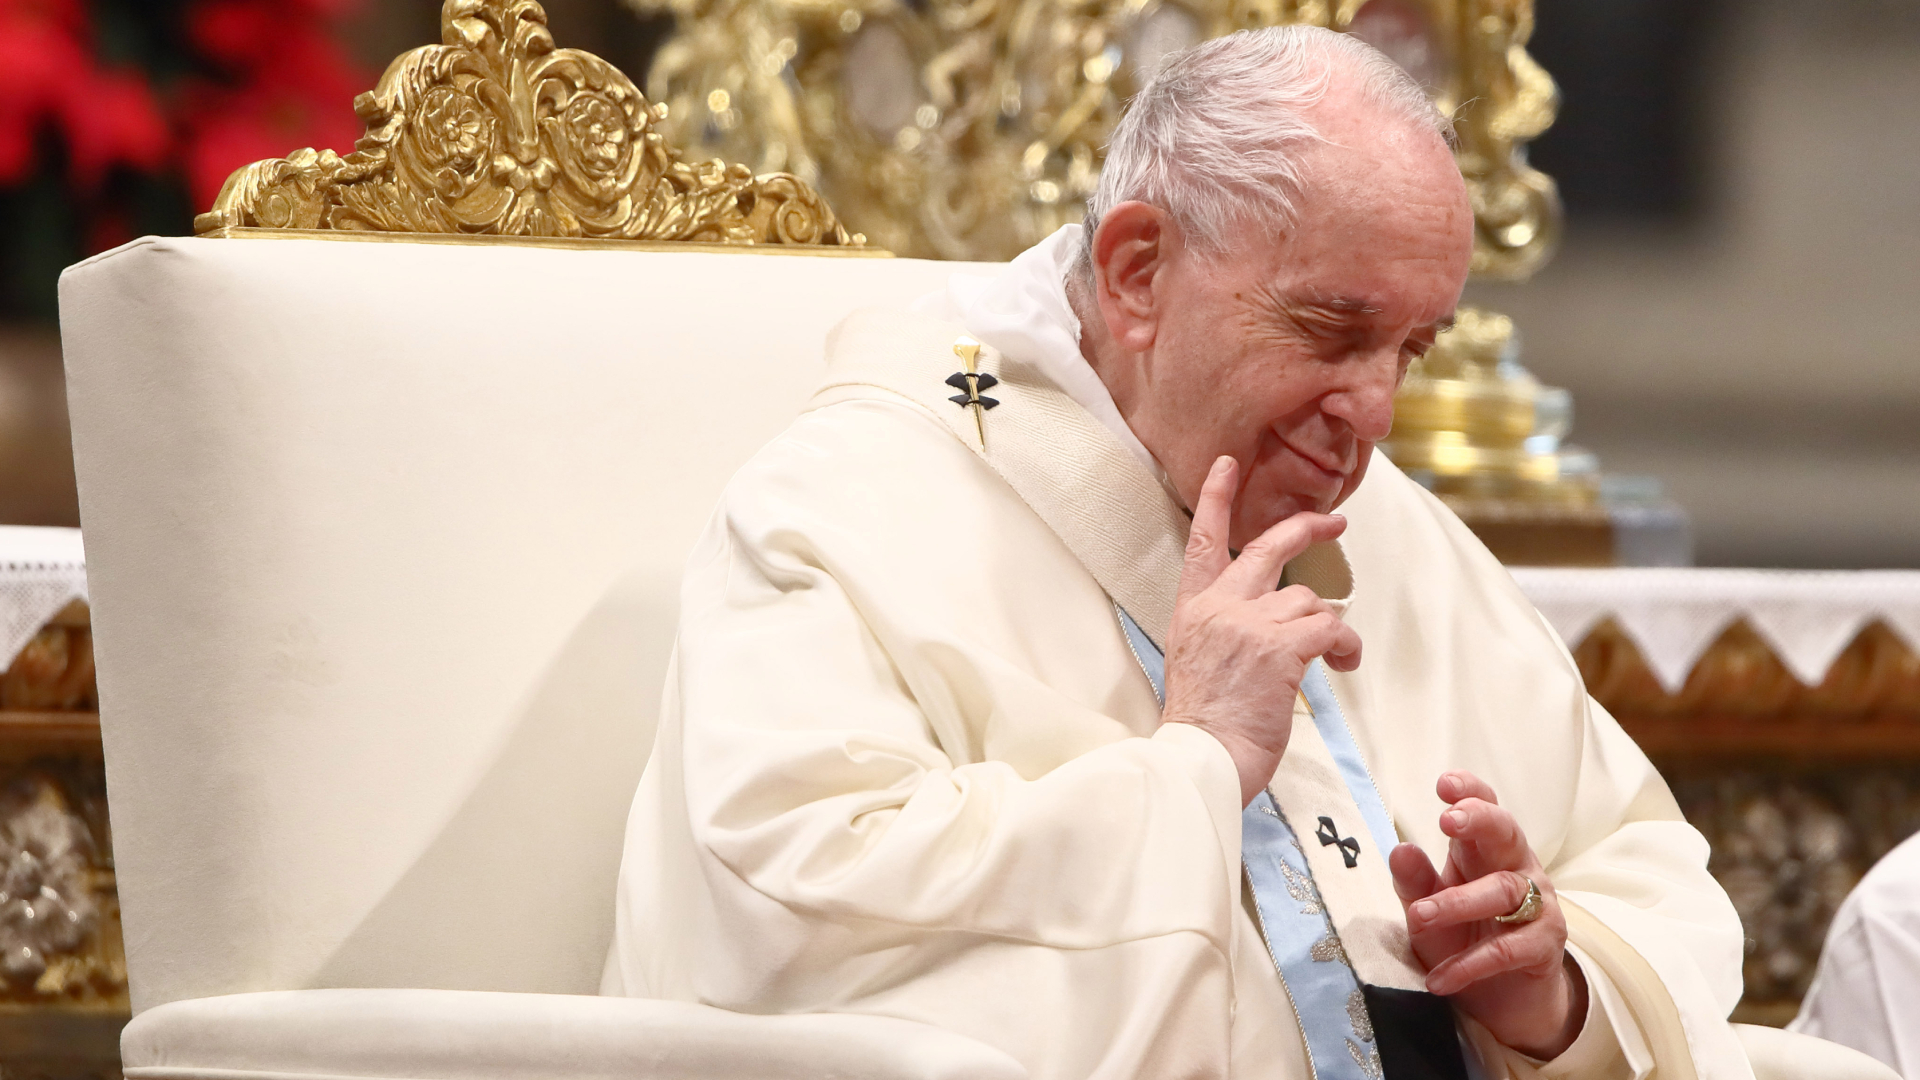 Pope Francis sitting in chair with hands up